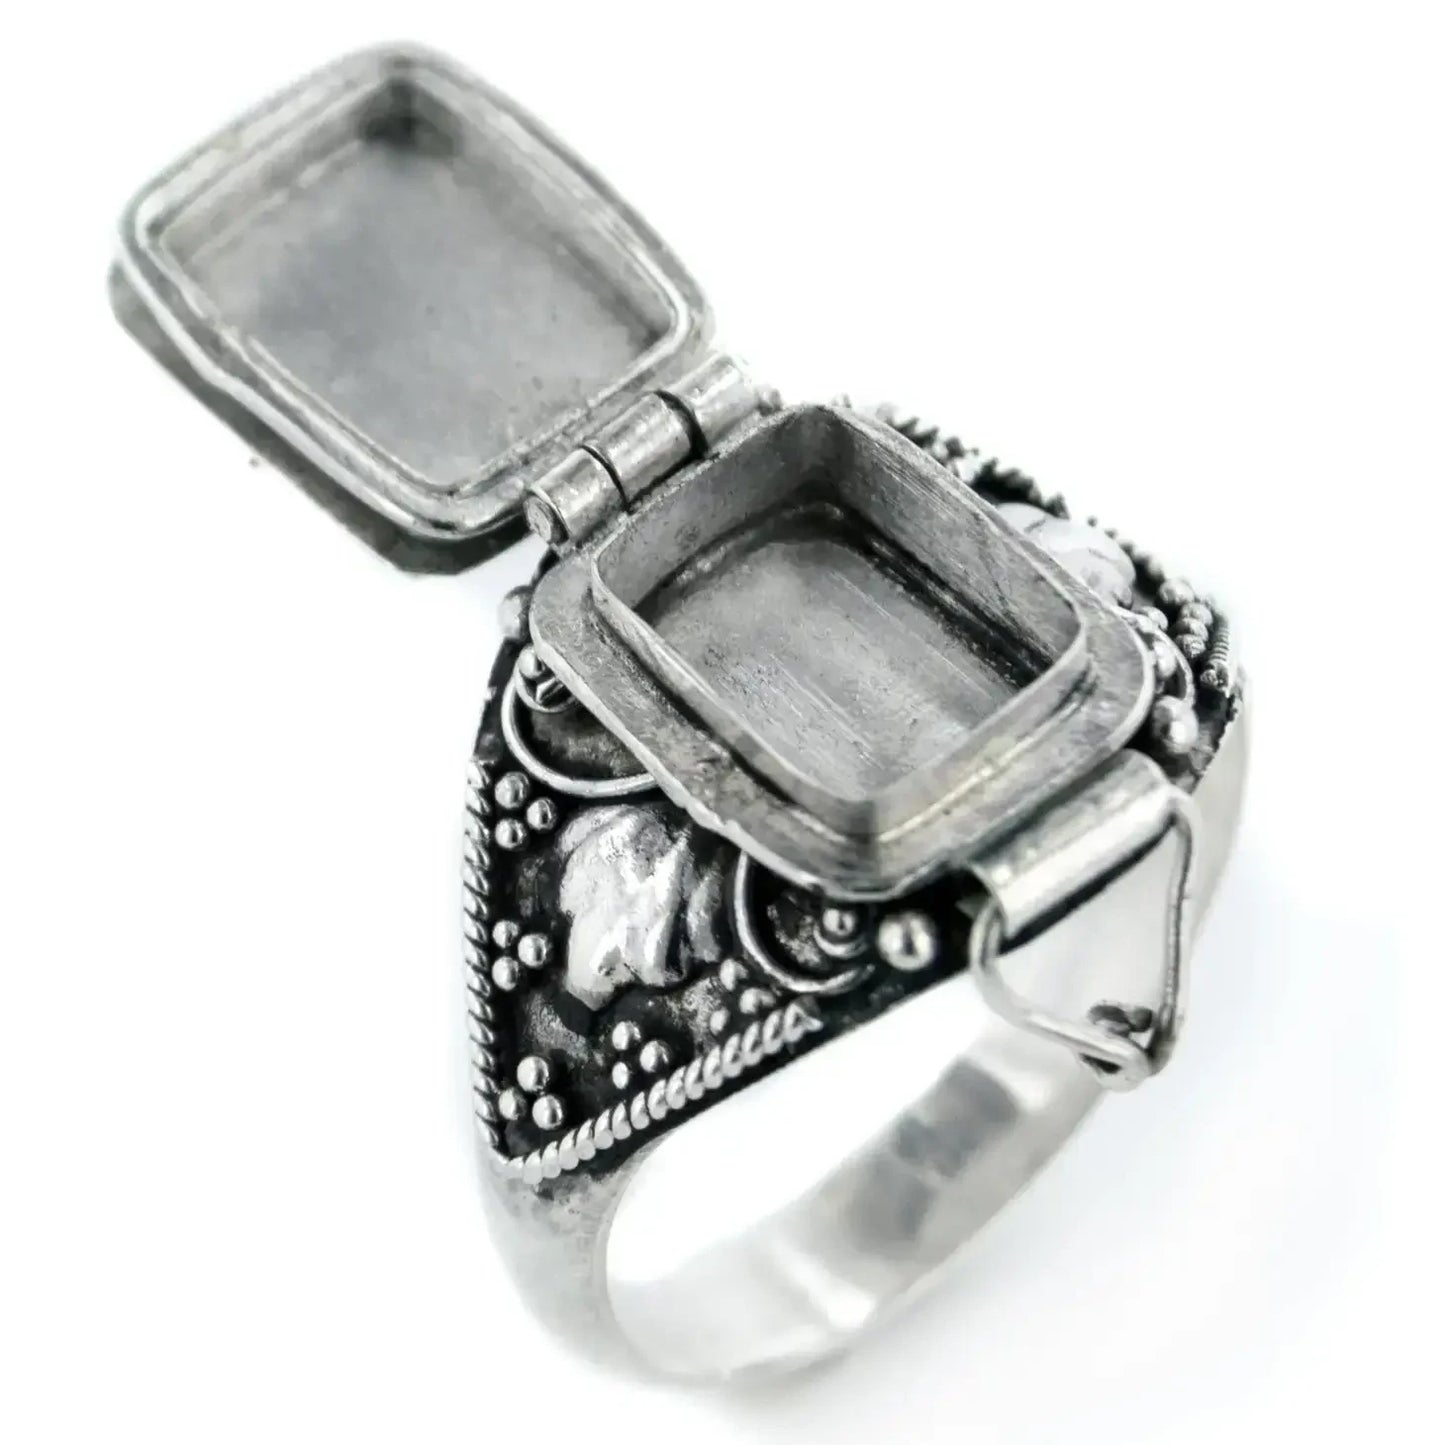 Silver Medieval Poison Ring with Rainbow Moonstone - Size 10